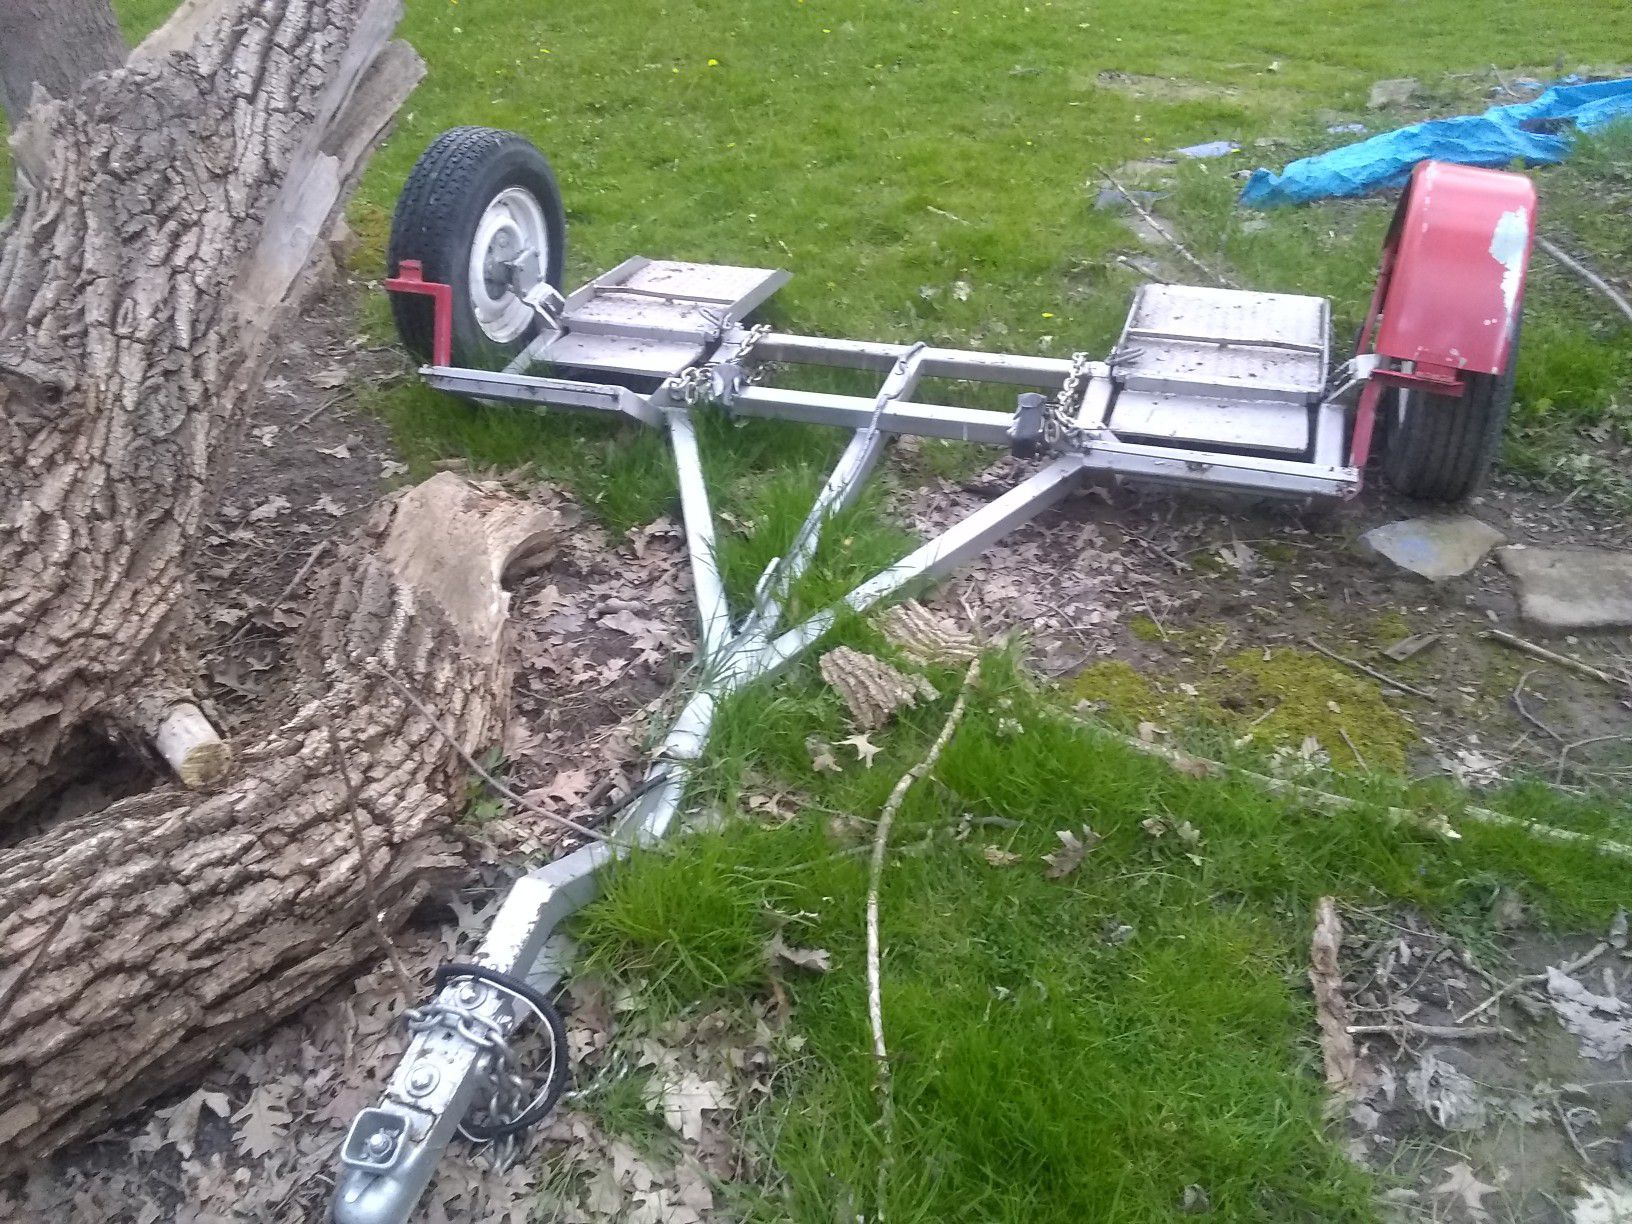 Tow dolly with straps